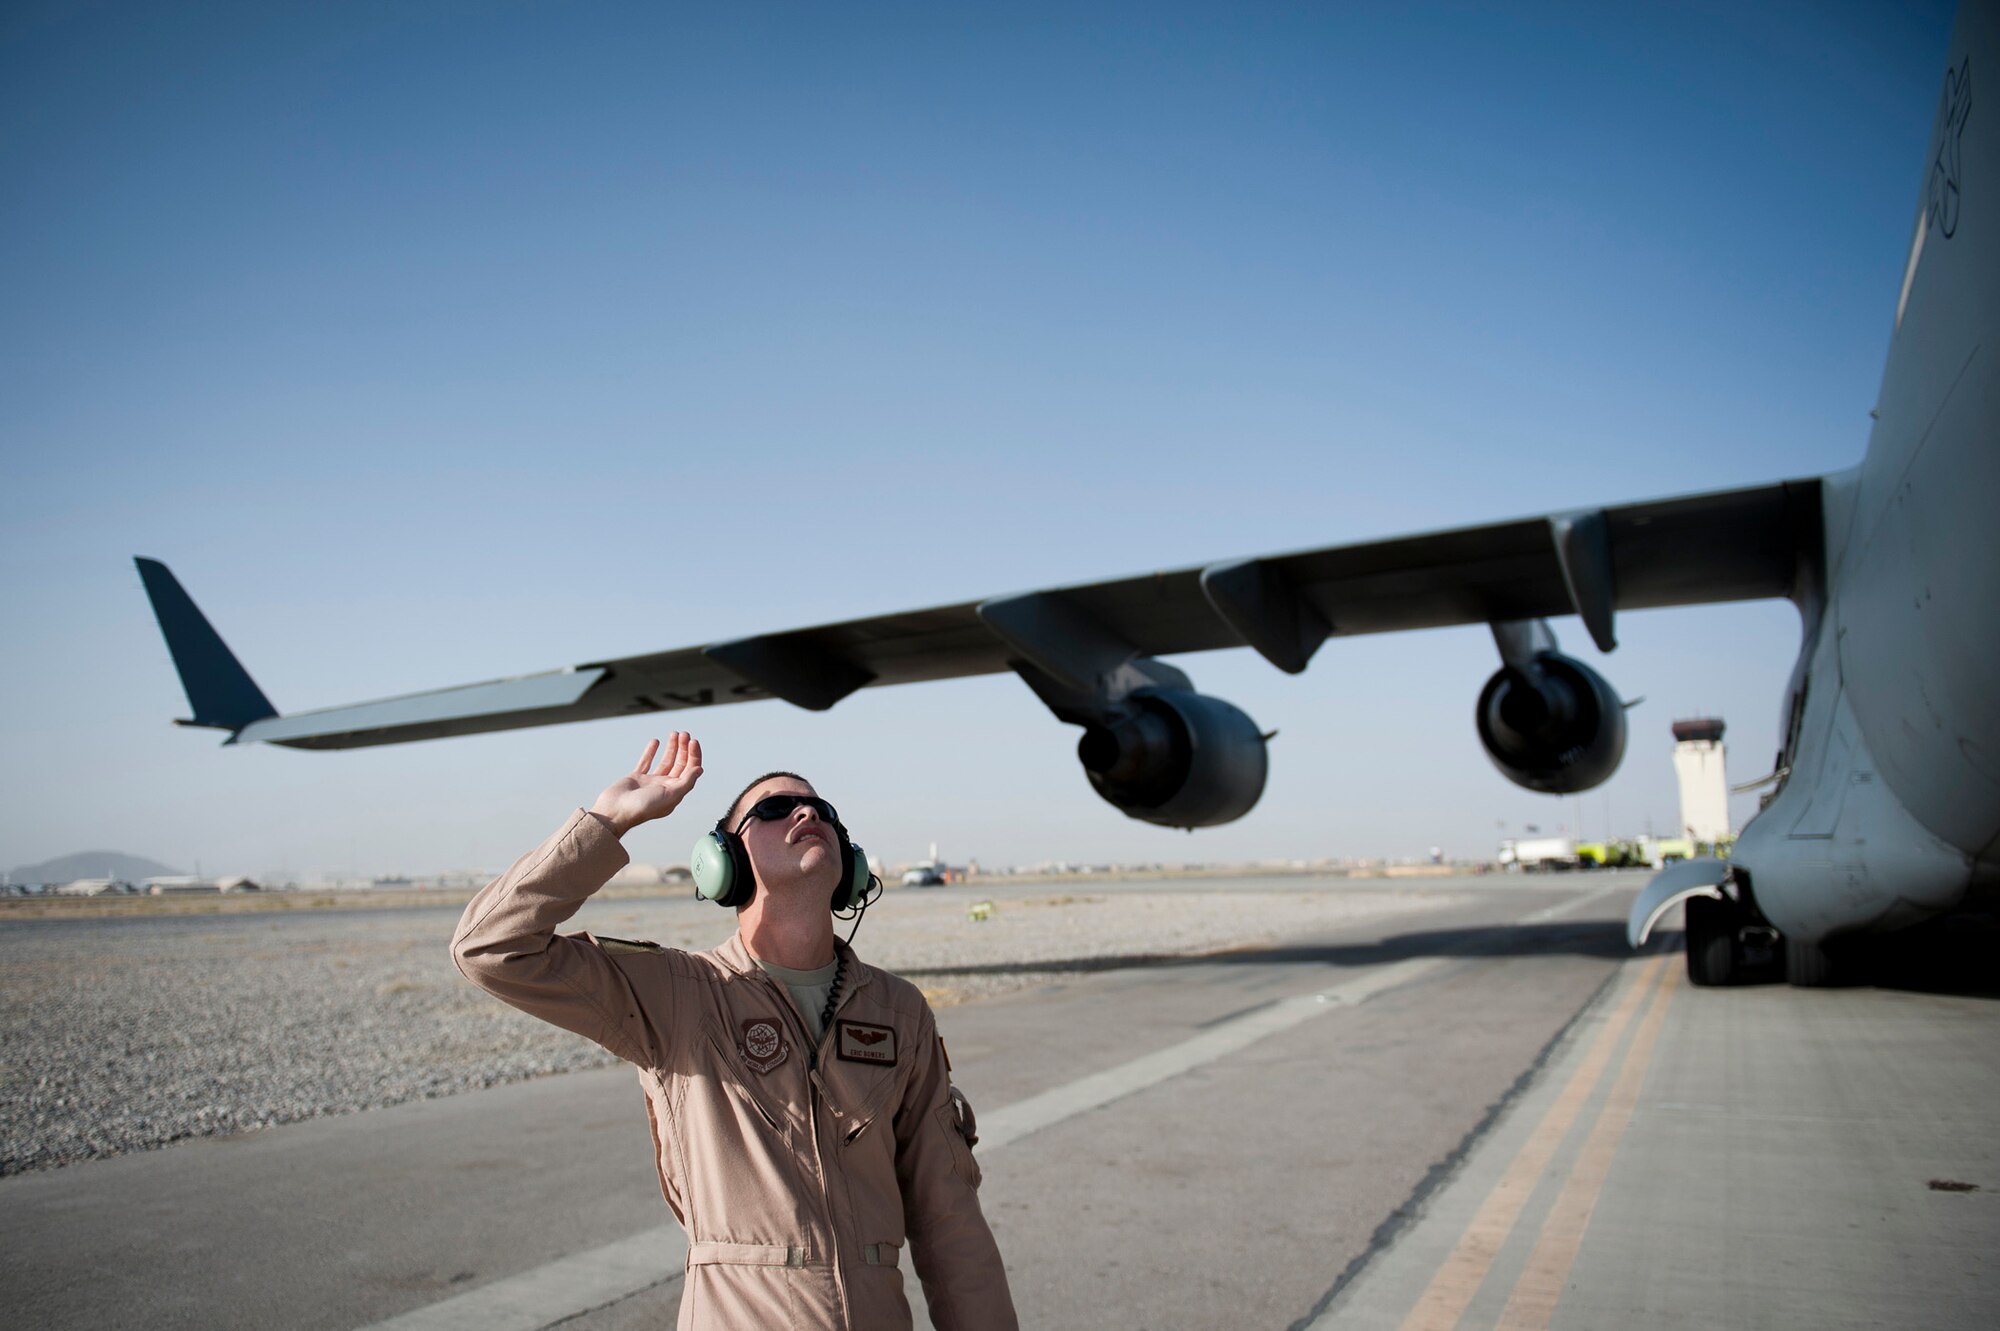 Capt. Eric Bowers, an 817th Expeditionary Airlift Squadron pilot, inspects a Globemaster III aircraft Aug. 18, 2011, before a flight at Kandahar Air Field, Afghanistan. The crew transported equipment and supplies from Incirlik Air Base, Turkey. (U.S. Air Force photo by Tech. Sgt. Michael B. Keller/Released)